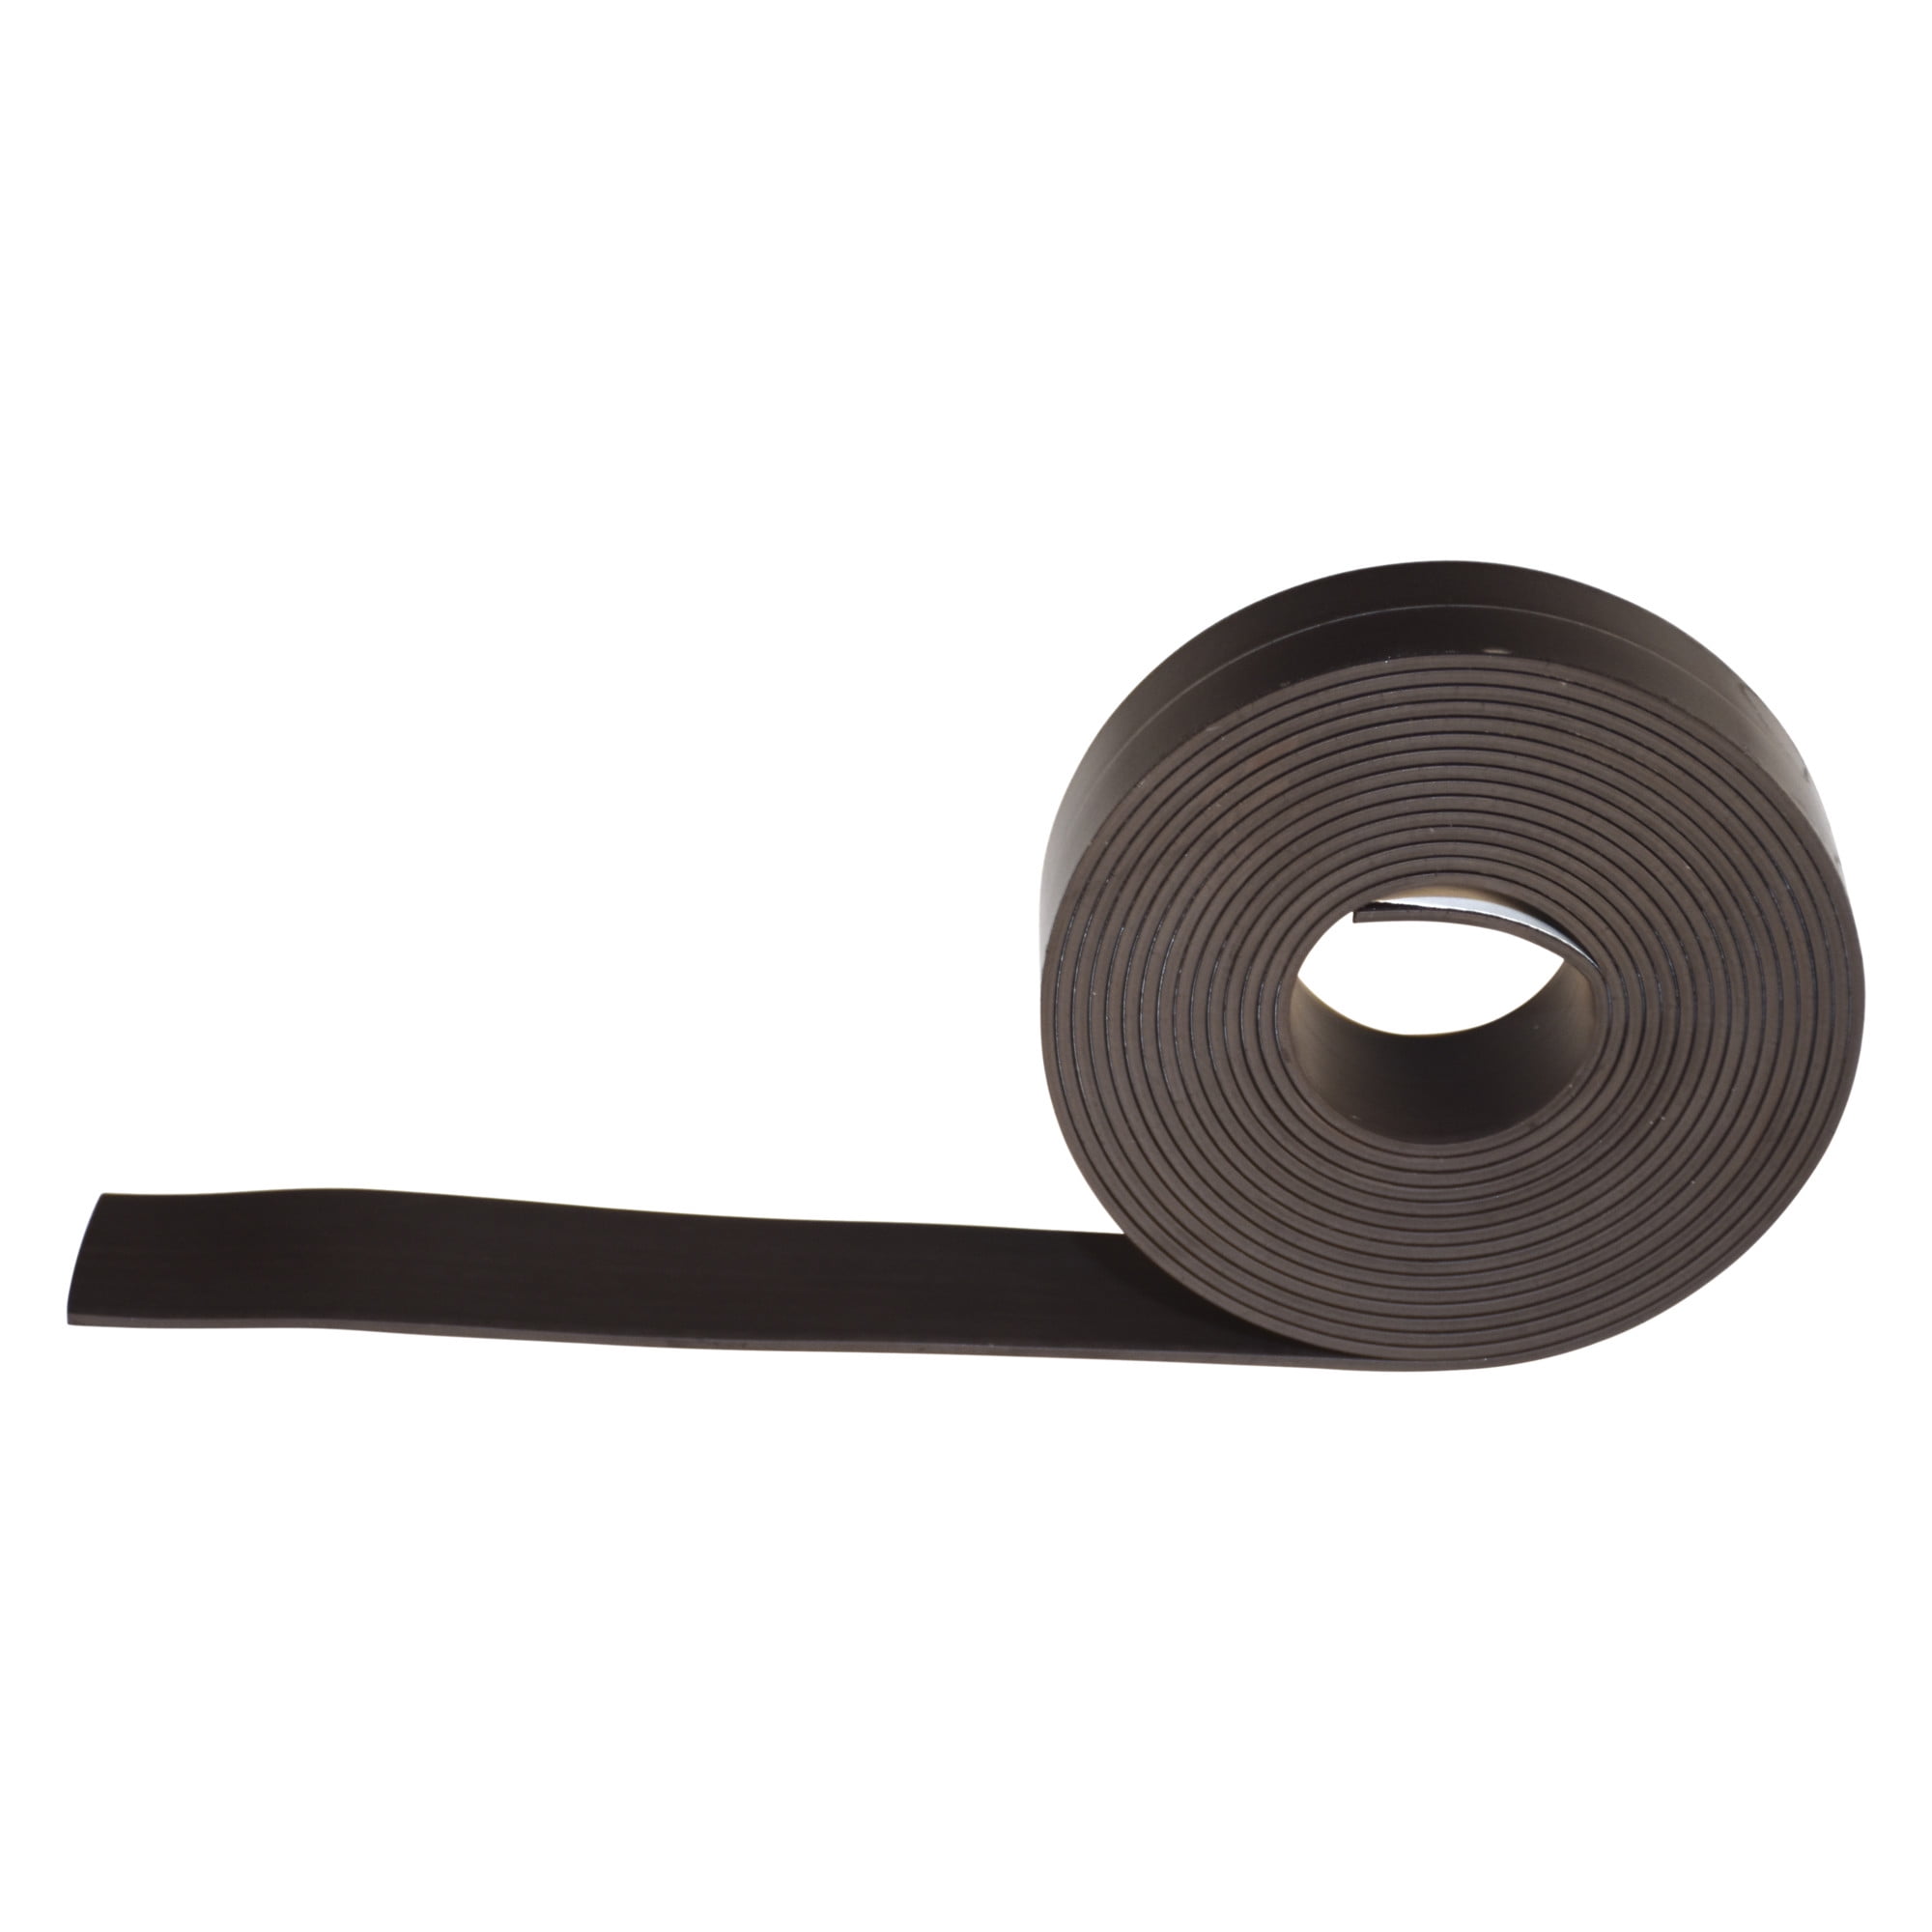 10 Meters Rubber Magnet 10*1 mm Self Adhesive Flexible Magnetic Strip  Rubber Magnet Tape Width 10mm Thickness 1mm 10x1 mm